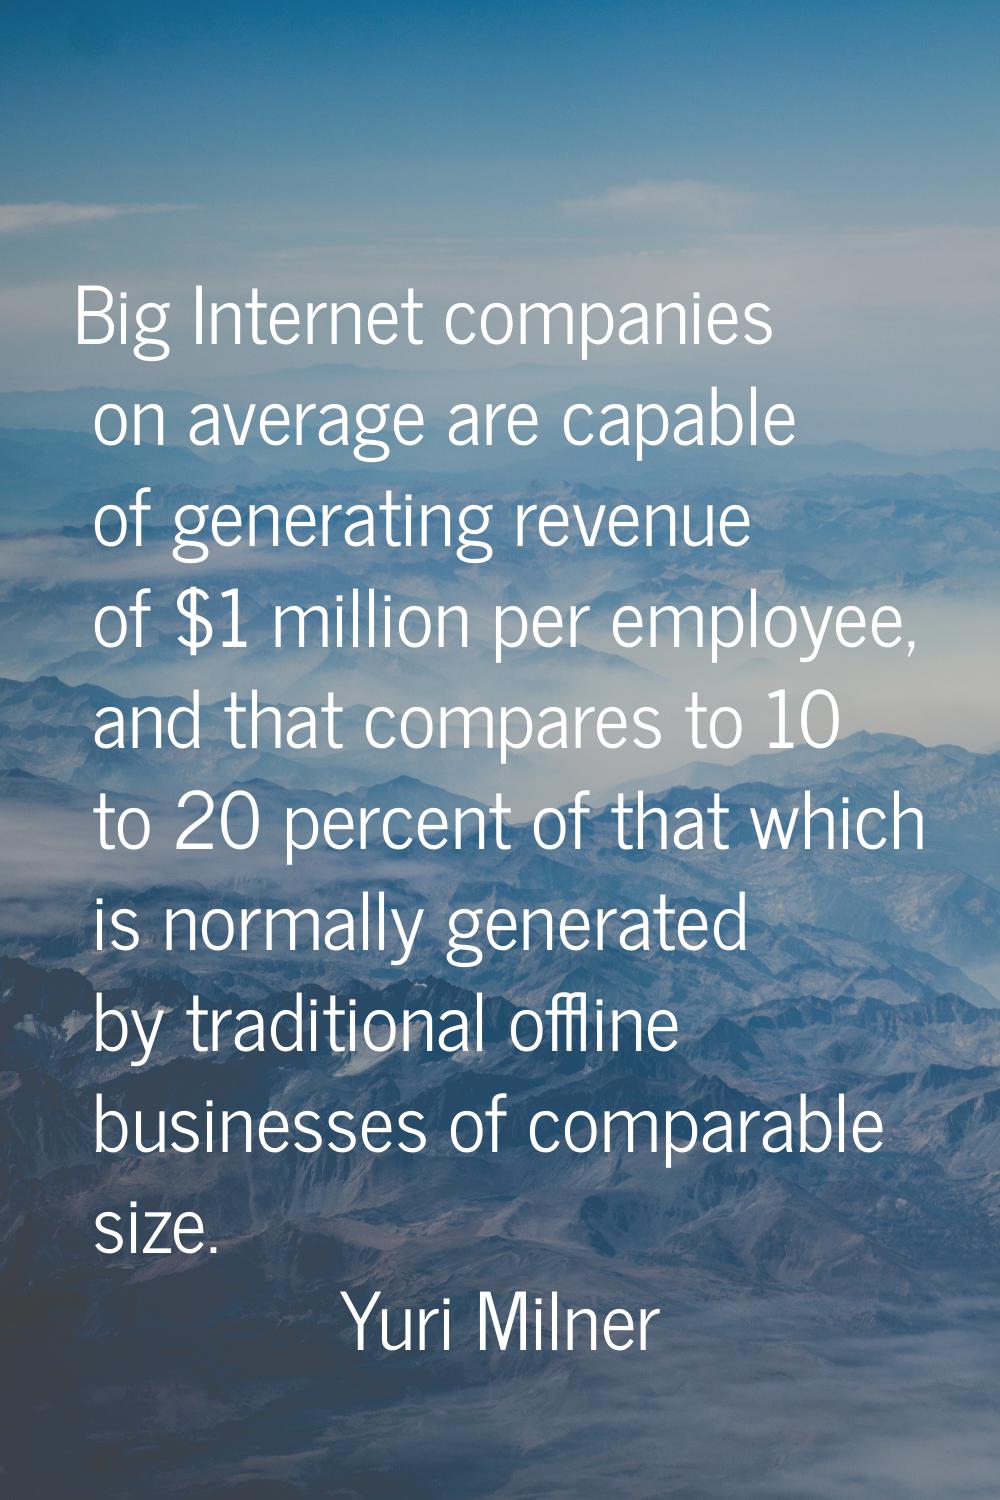 Big Internet companies on average are capable of generating revenue of $1 million per employee, and